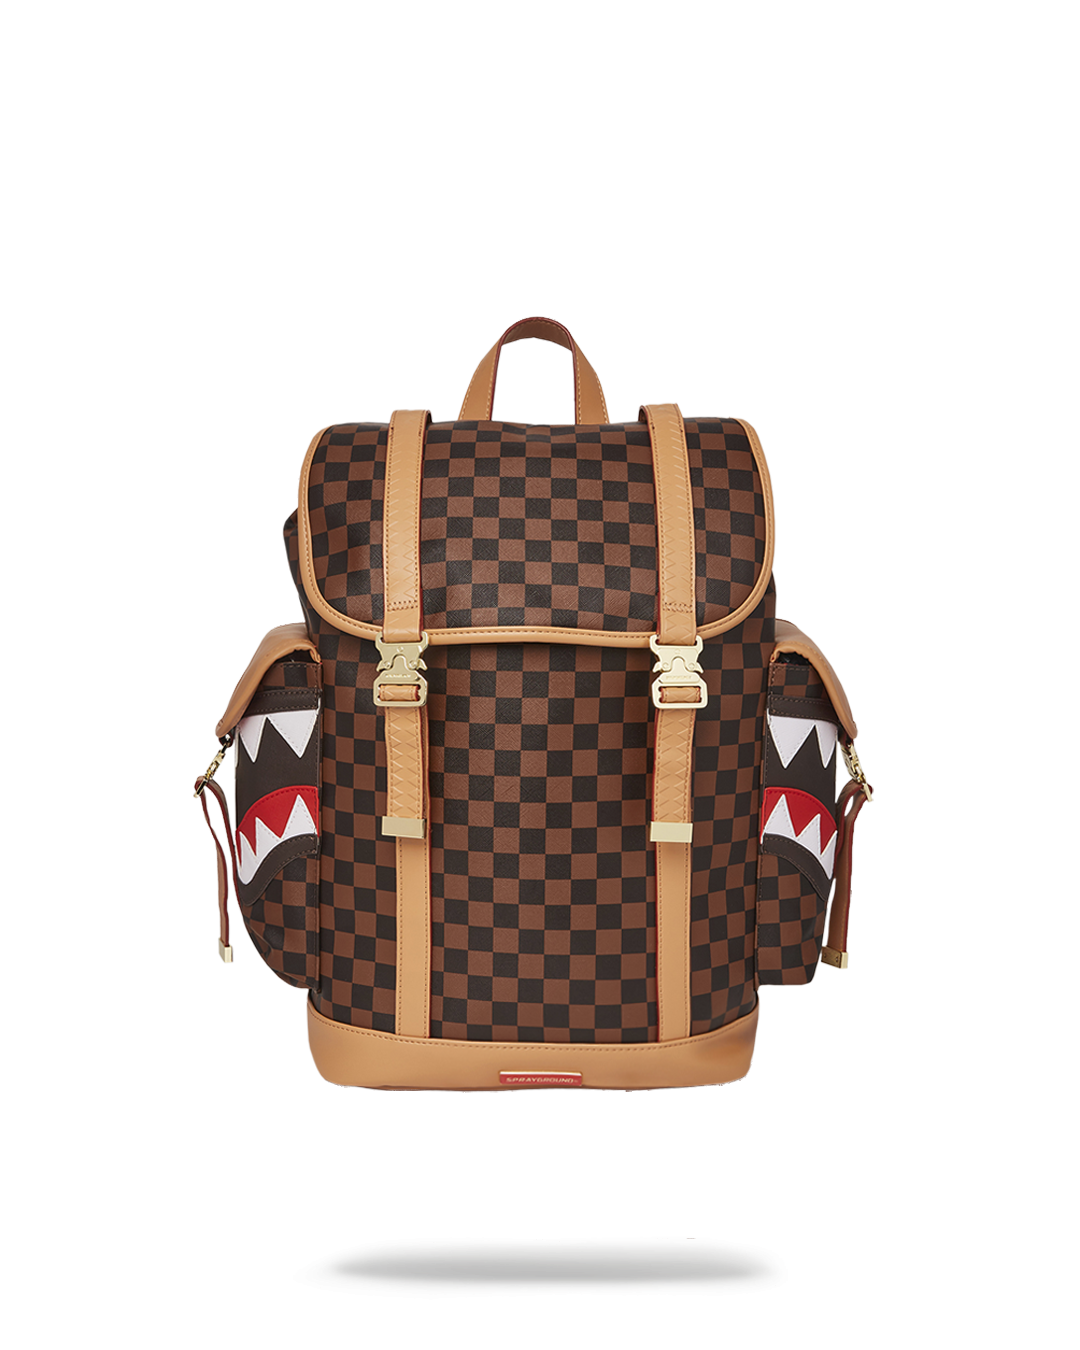 Backpacks Sprayground - Henny Air To The Throne duffel bag in